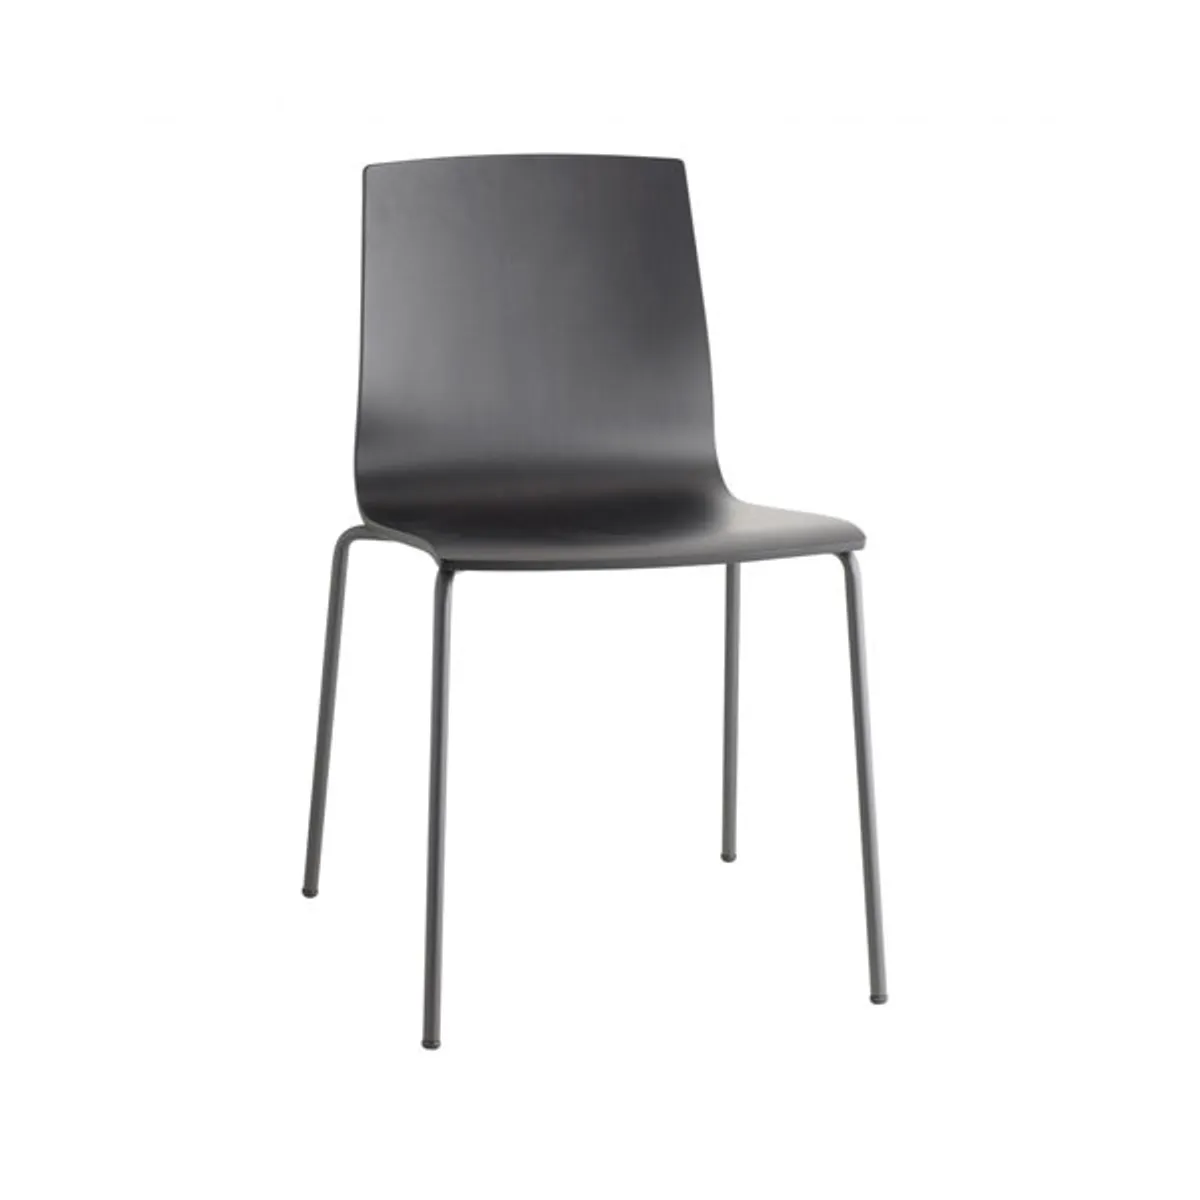 Evie 2 metal side chair 6 Inside Out Contracts